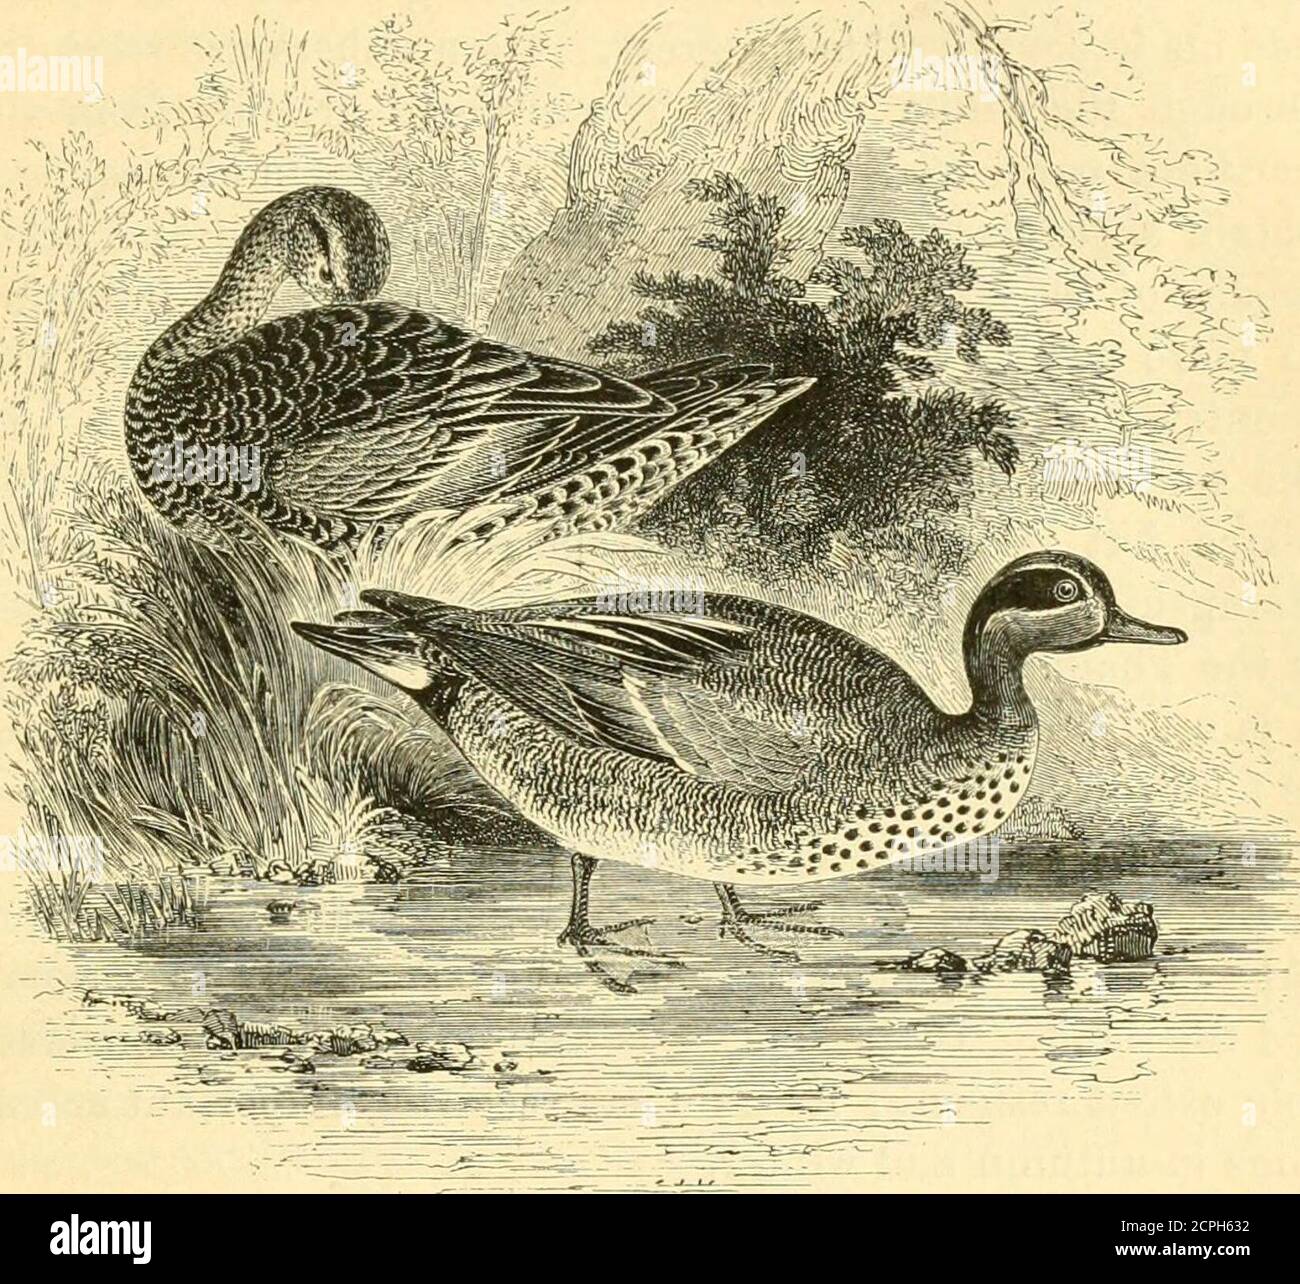 . A history of British birds . ANSERES. TEAL. 387 ANATID.E.. QUERQUEDULA CRECCA (Linn8BUS*). THE TEAL. Anas crecca. QuERQCEDULA, Stephensf.—Bill about as long as the head, the edges nearlyparallel ; the extremities of the lamella exposed along the projecting edge ofthe upper mandible ; nostrils small and oblong. Wings rather long, pointed,the first and second quill-feathers sub-equal and longer than the rest ; scapularsand inner secondaries elongated and pointed. Tail of sixteen feathers, shortand rounded. Legs short ; tarsus compressed, anteriorly scutellate ; hind toevery small ; outer toe m Stock Photo